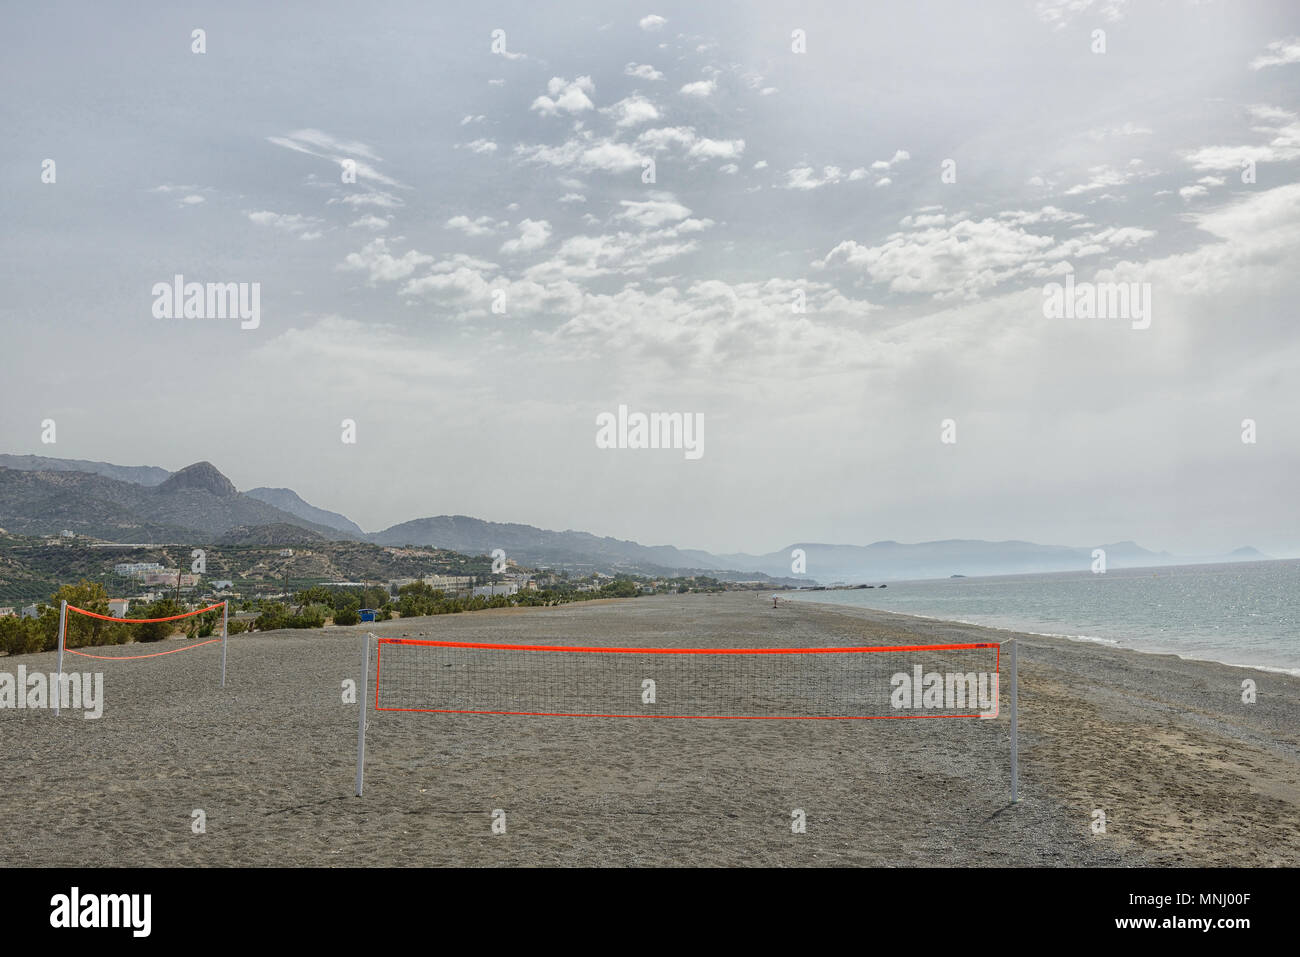 The view of the beach and mountains in the background with a net for beach volleyball Stock Photo